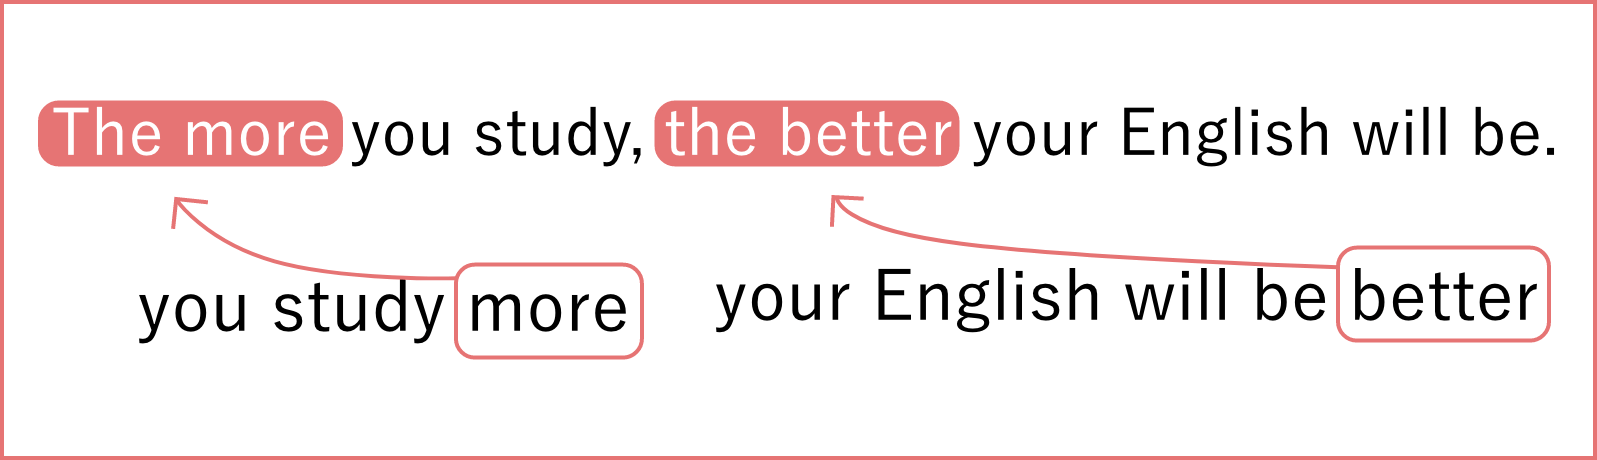 The more you study, the better your English will be.